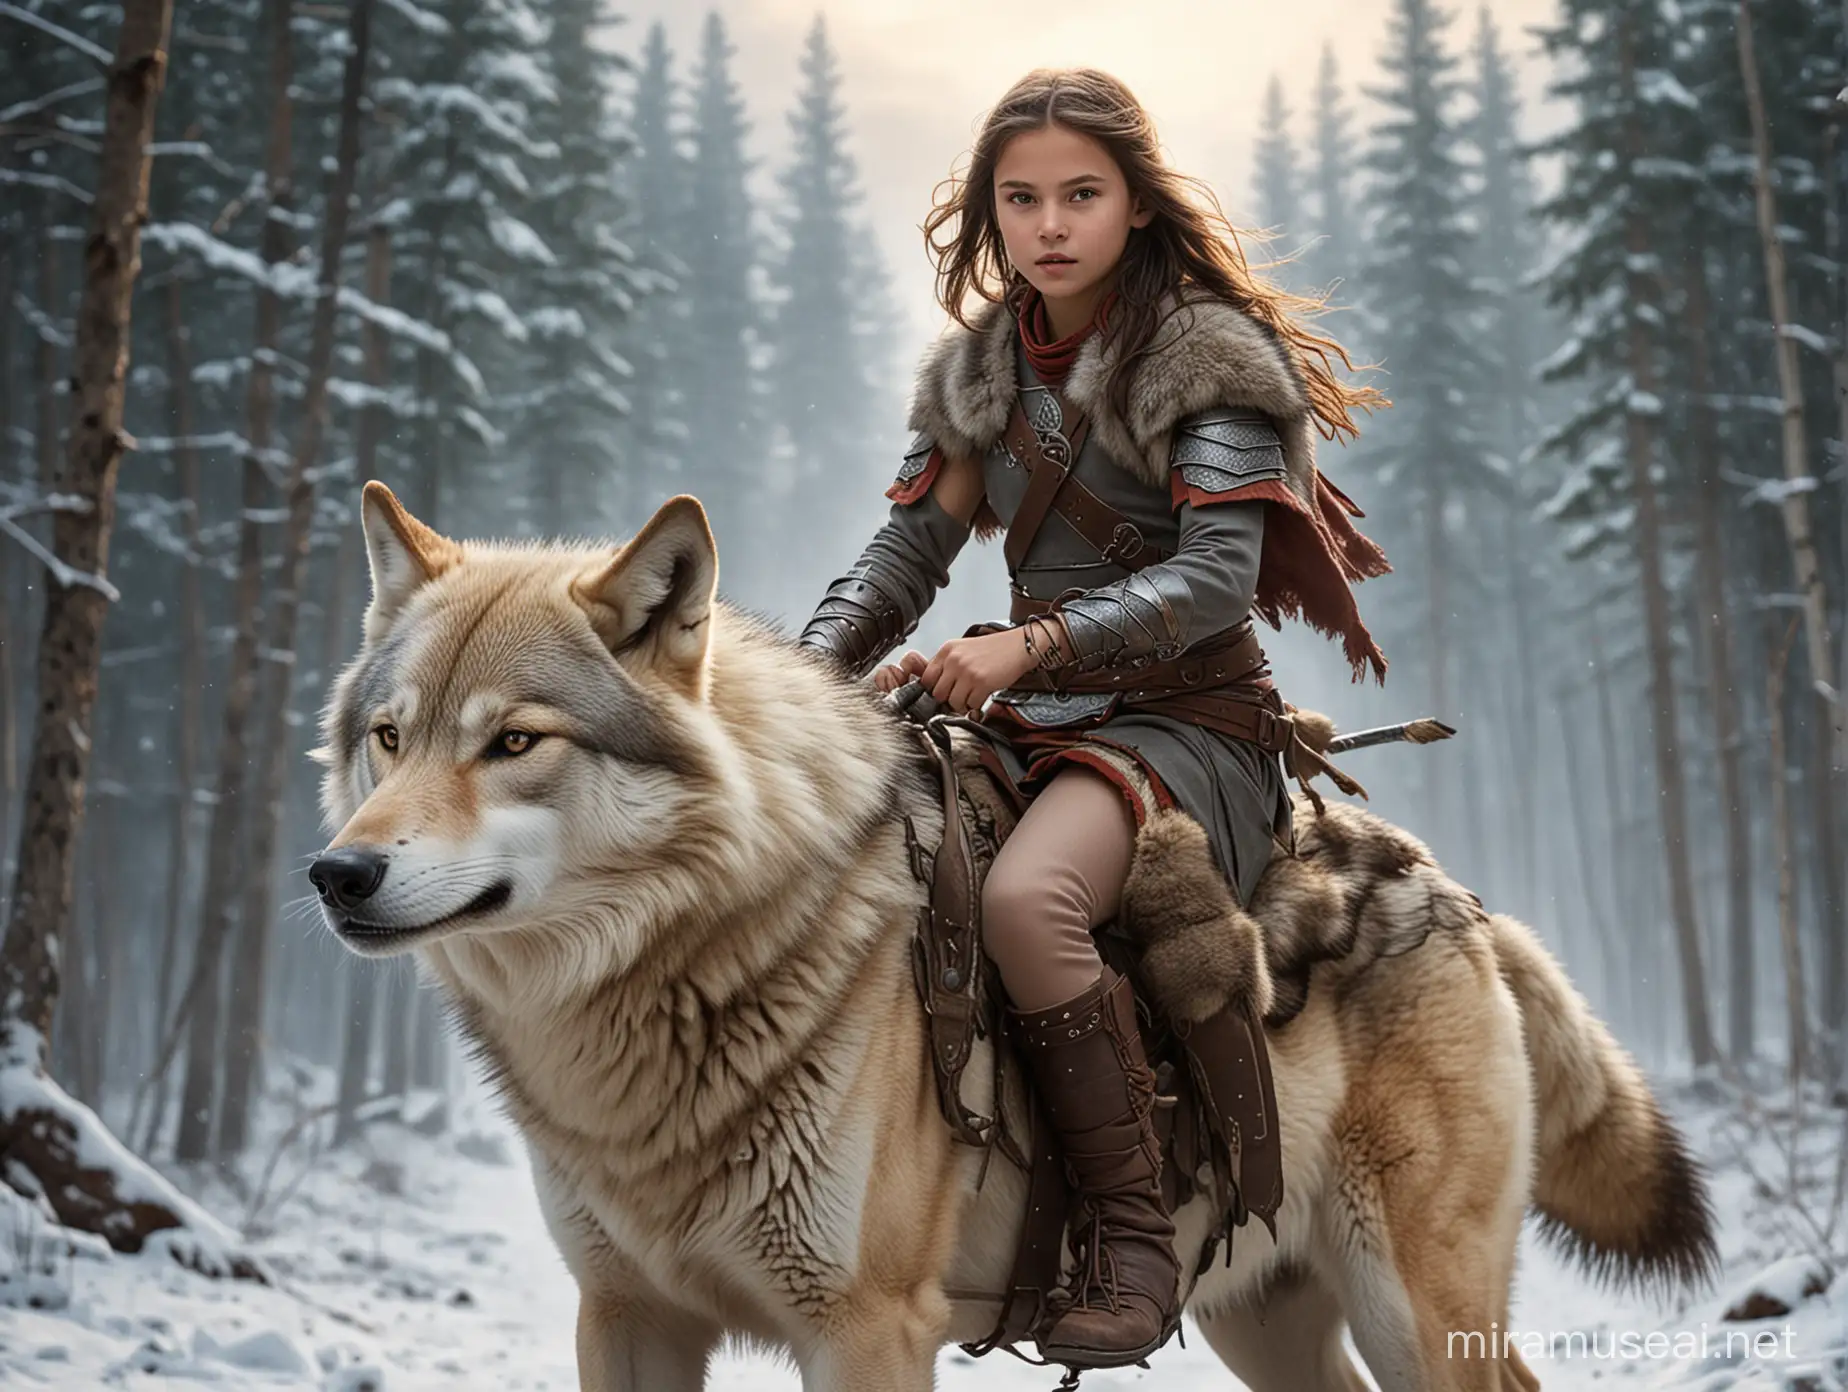 Courageous Young Girl Warrior Riding a Majestic Wolf